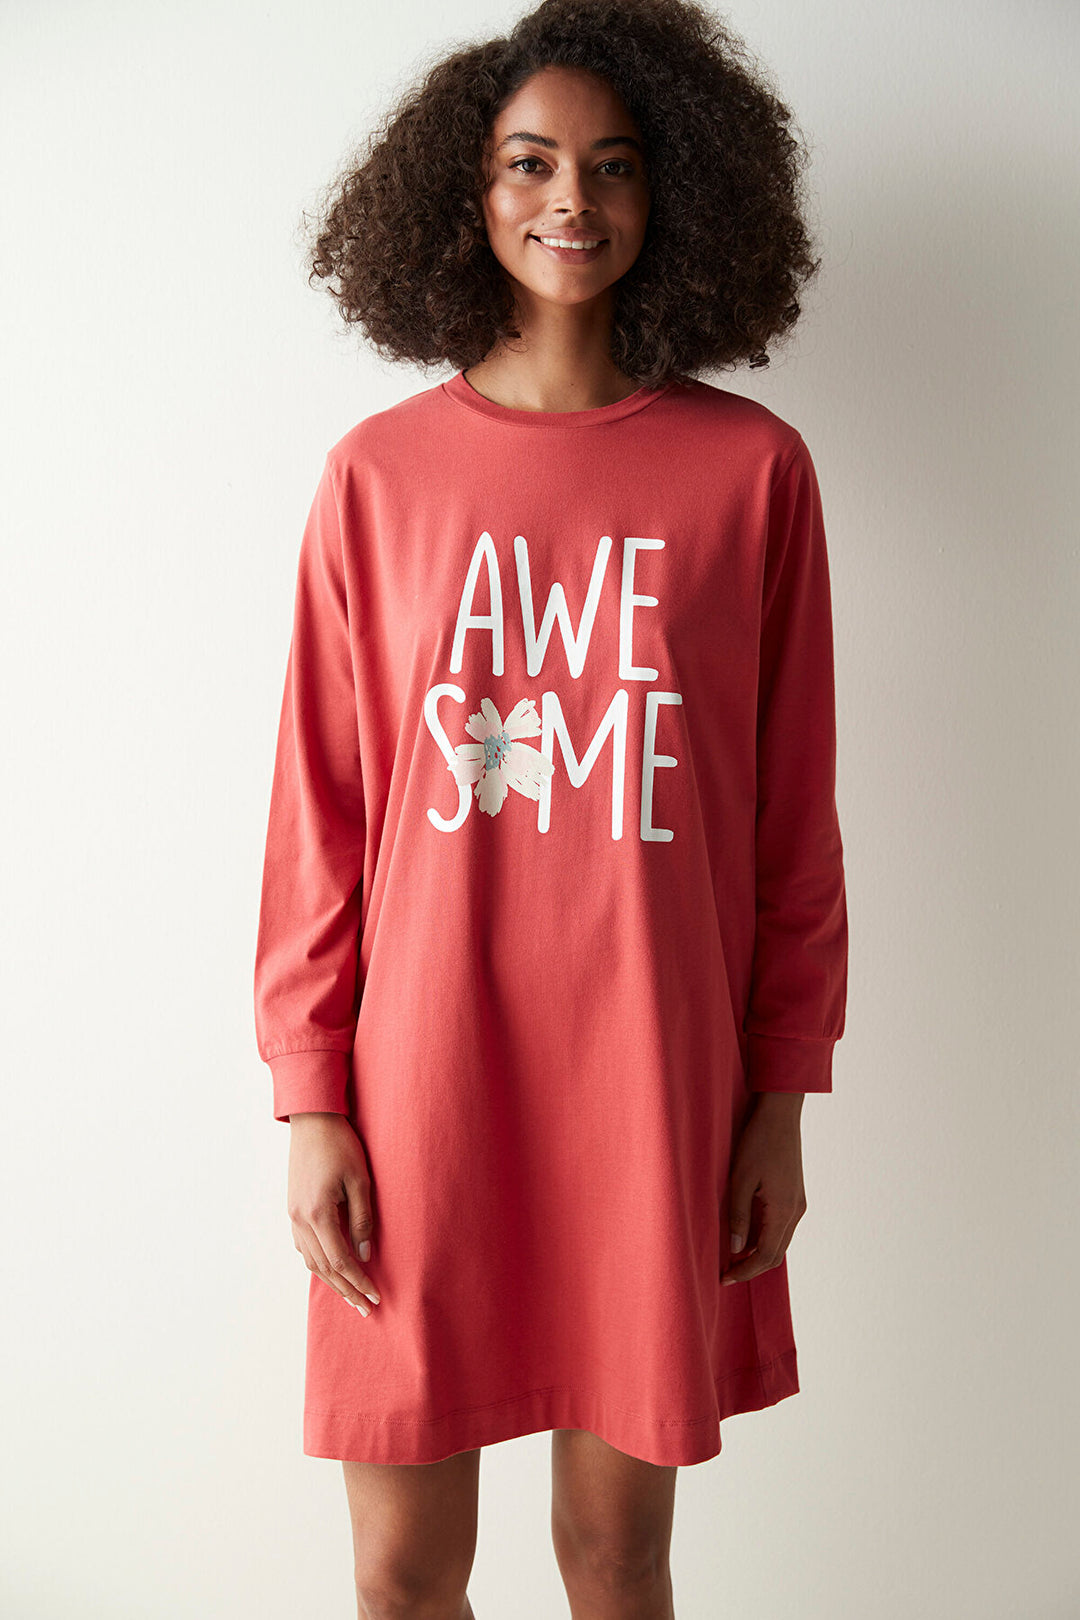 Awesome Slogan Printed Nightgown